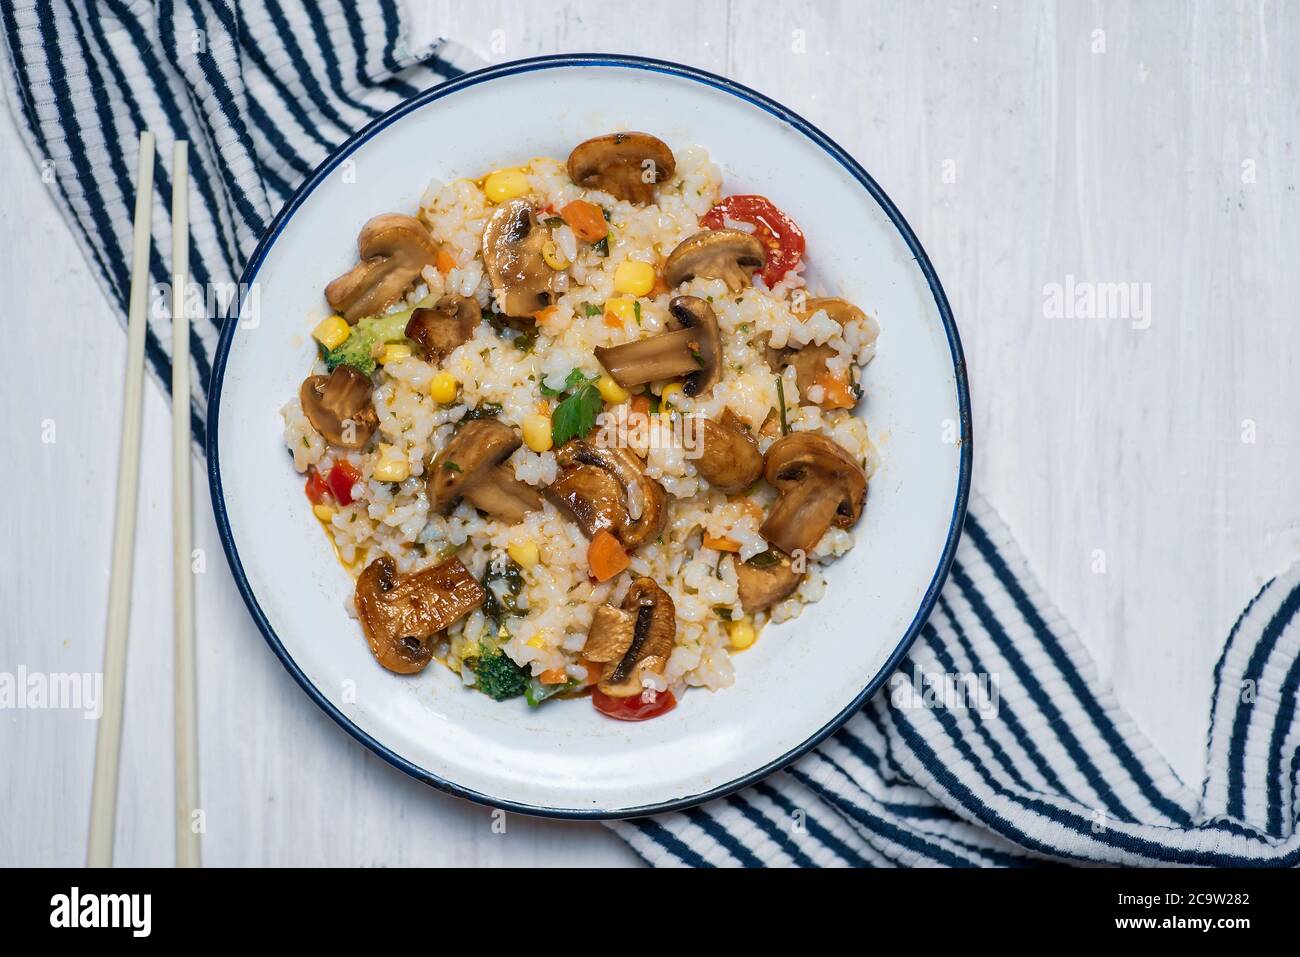 Homemade vegetarian risotto with mushrooms and vegetables on a plate Stock Photo